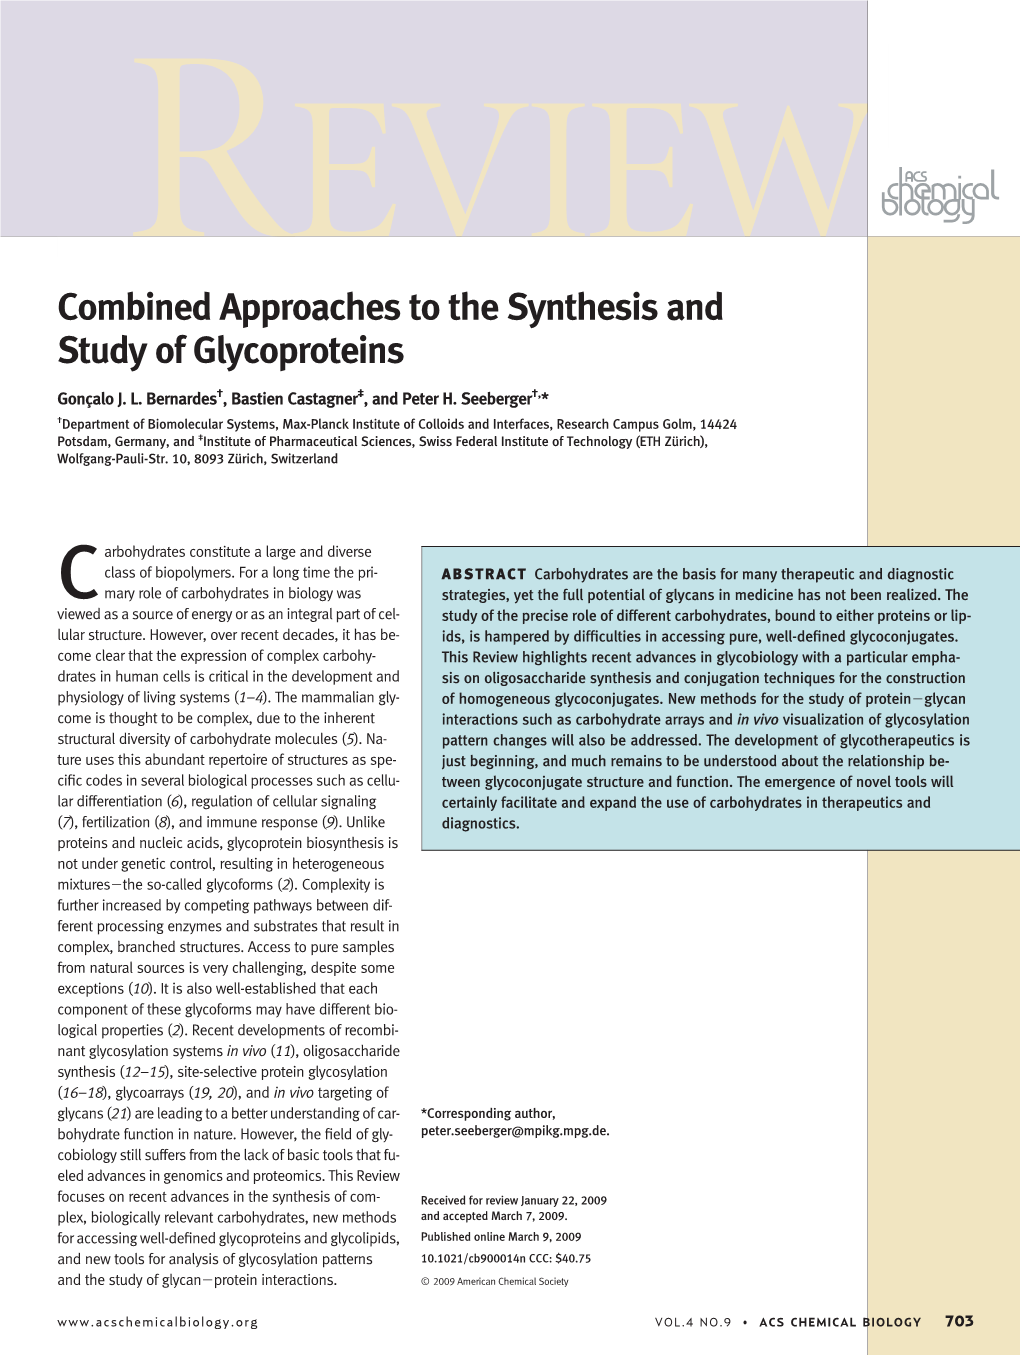 Combined Approaches to the Synthesis and Study of Glycoproteins